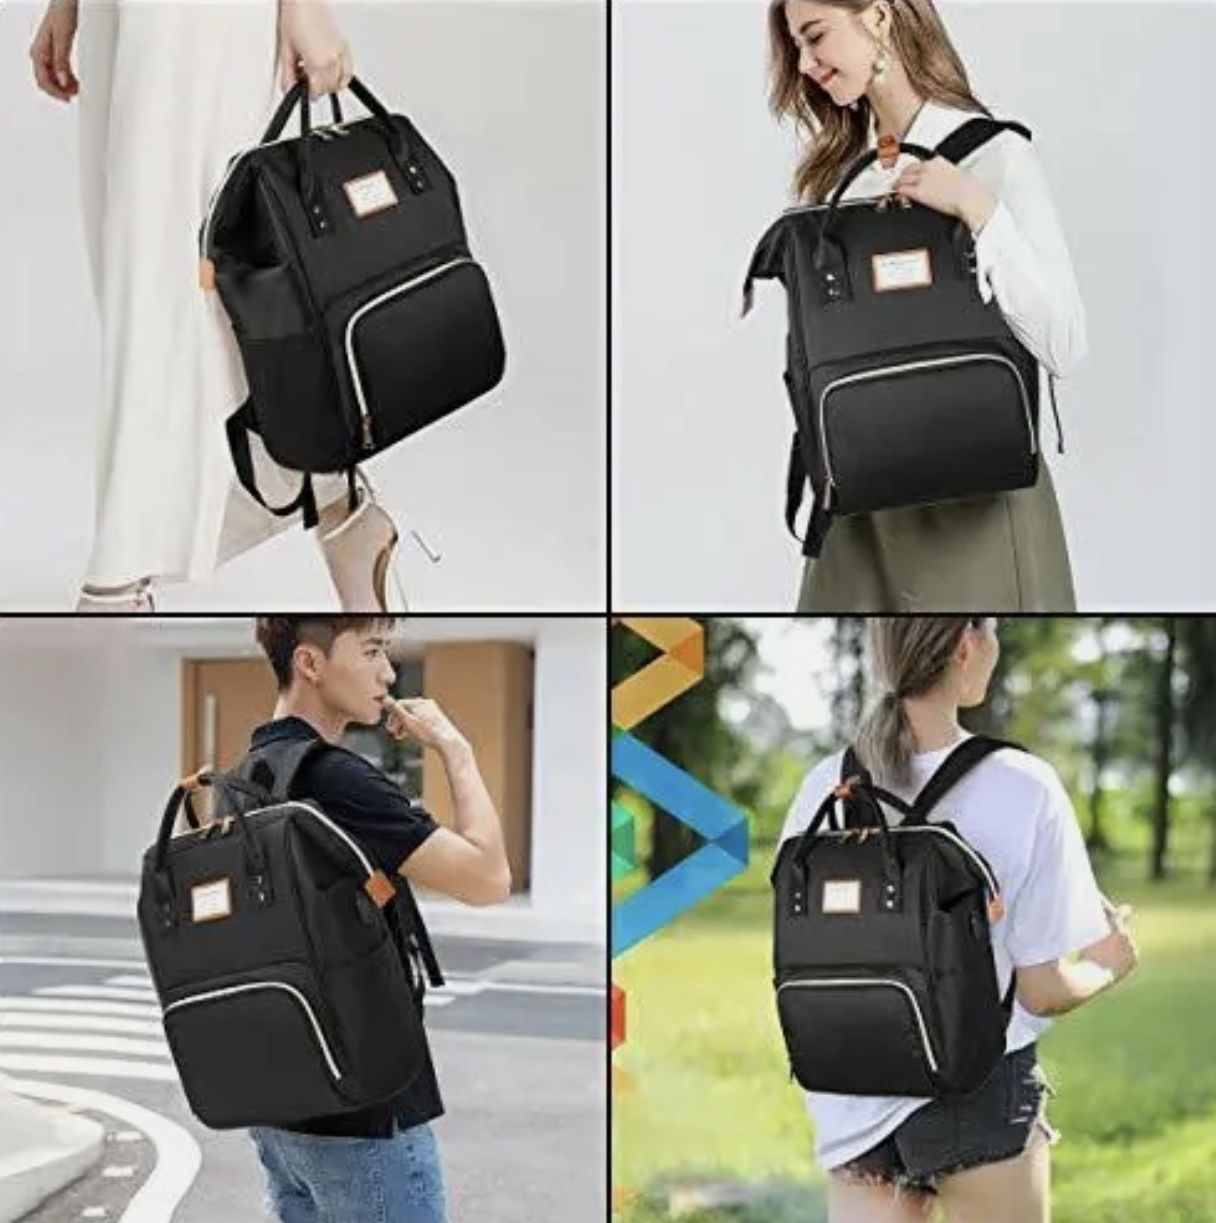 New SOWAOVUT bag or Laptop Backpack 15 Inch Casual Daypack Water Resistant